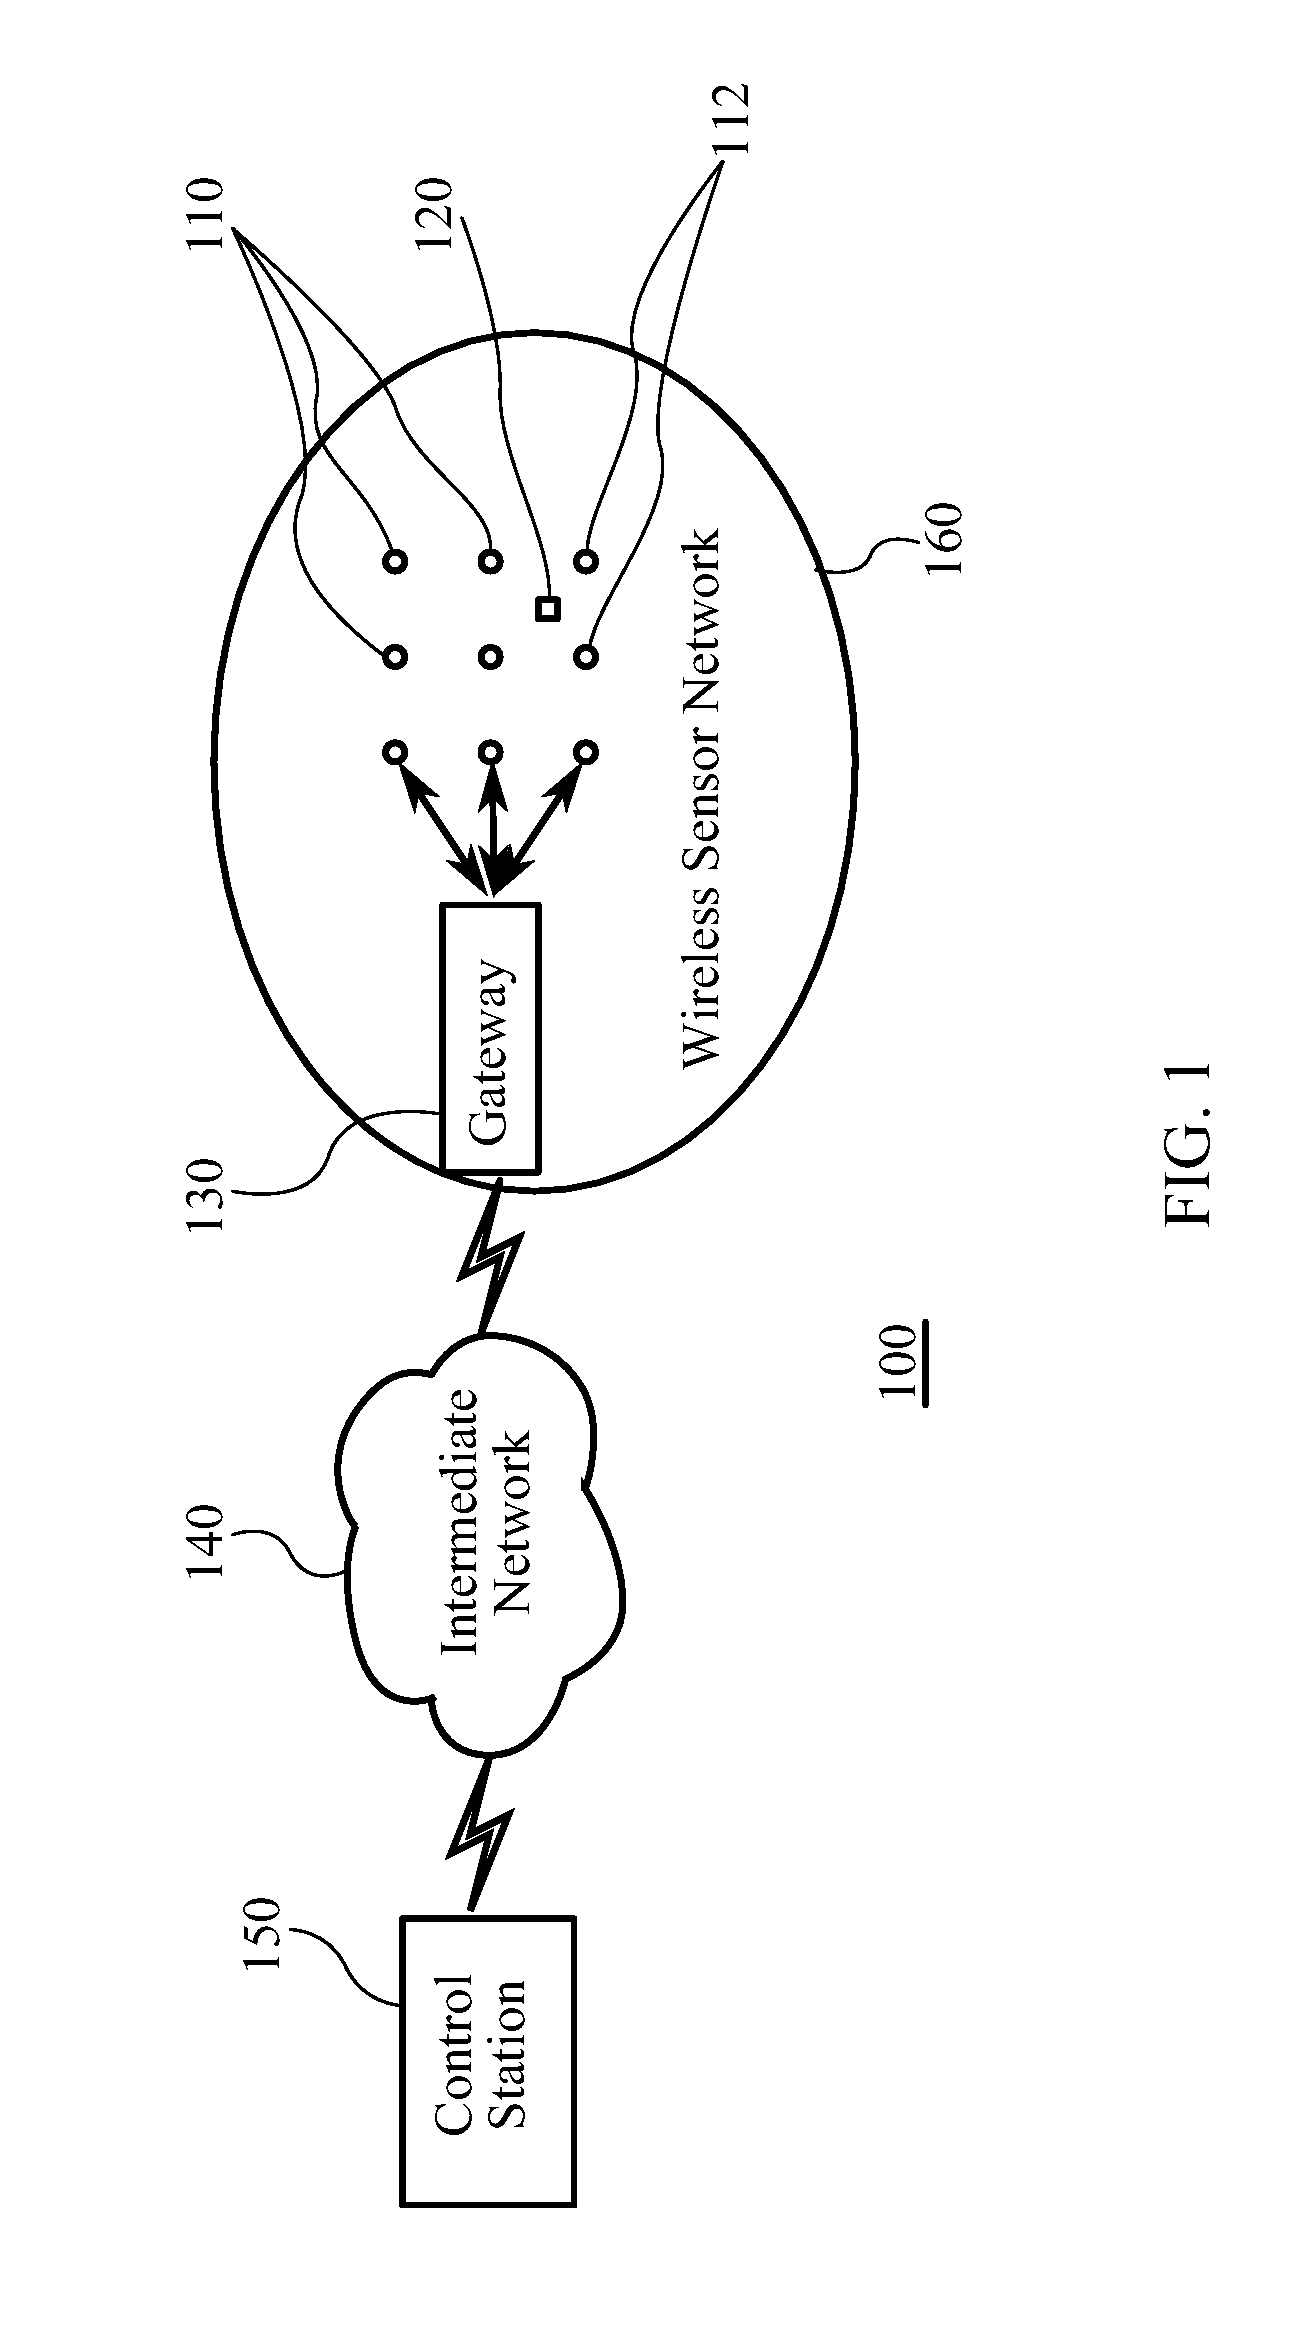 System and method for self-calibrating, self-organizing and localizing sensors in wireless sensor networks